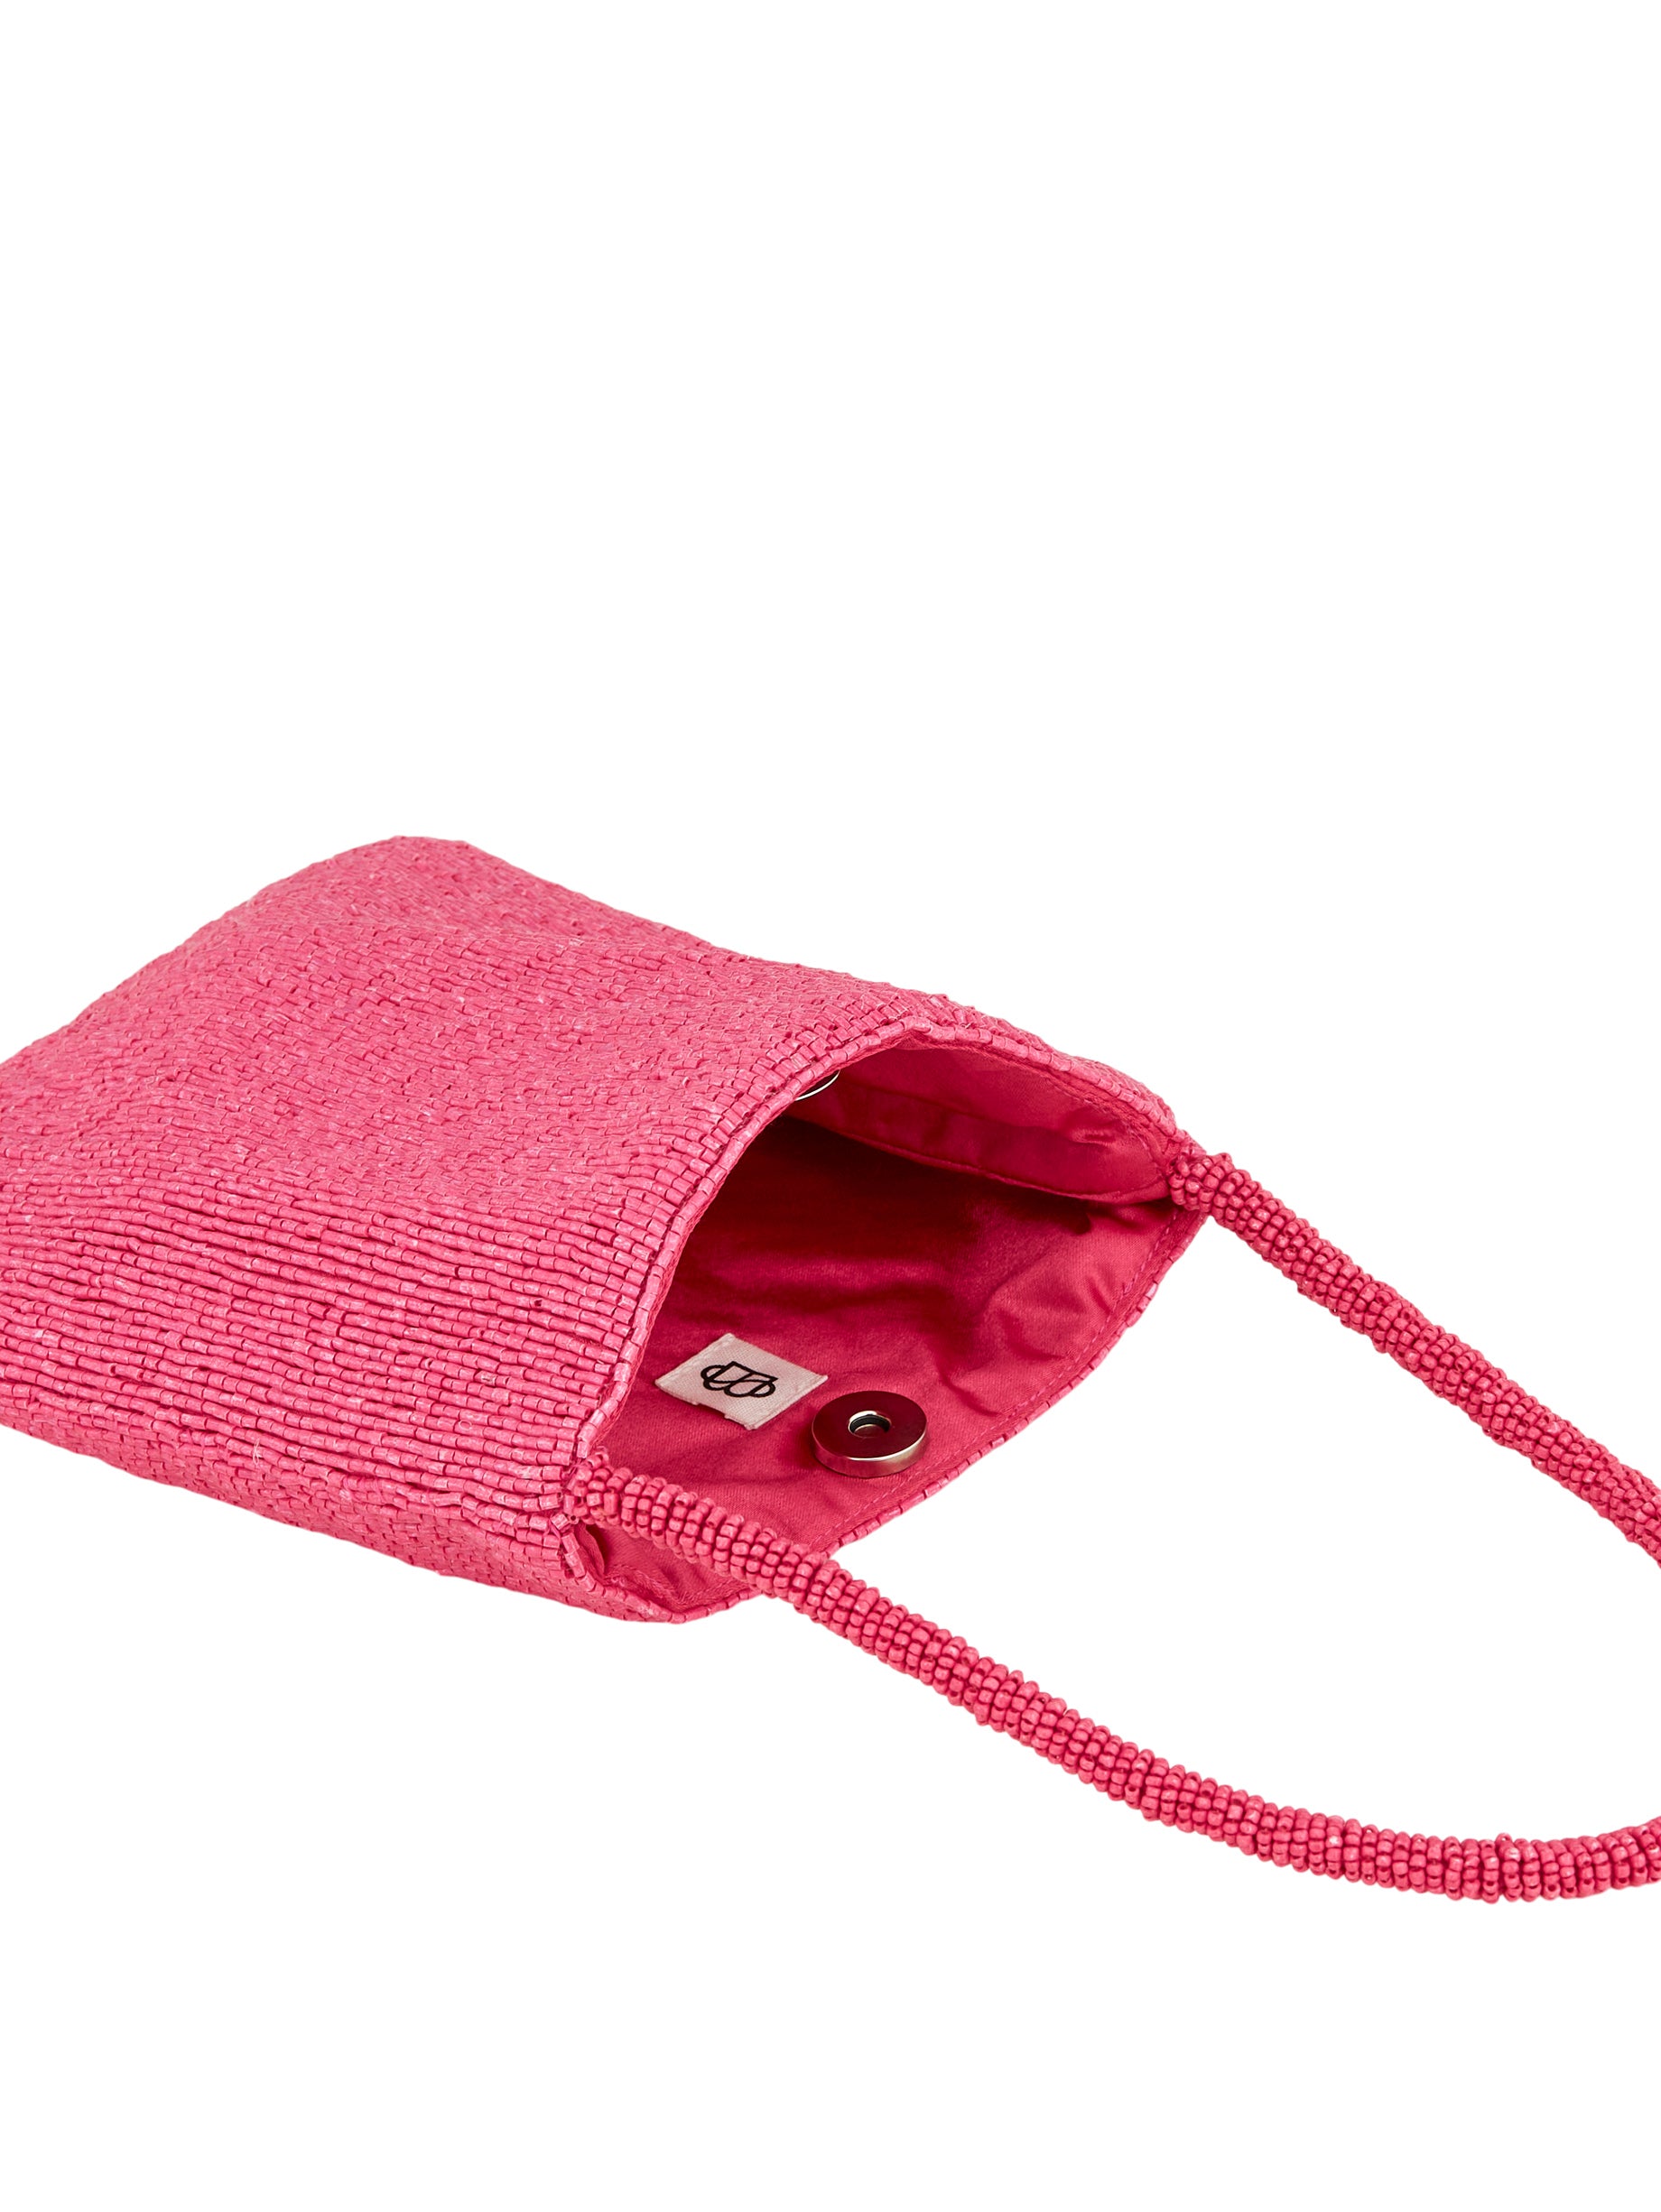 Lustrous Nyra Bag - Hot Pink